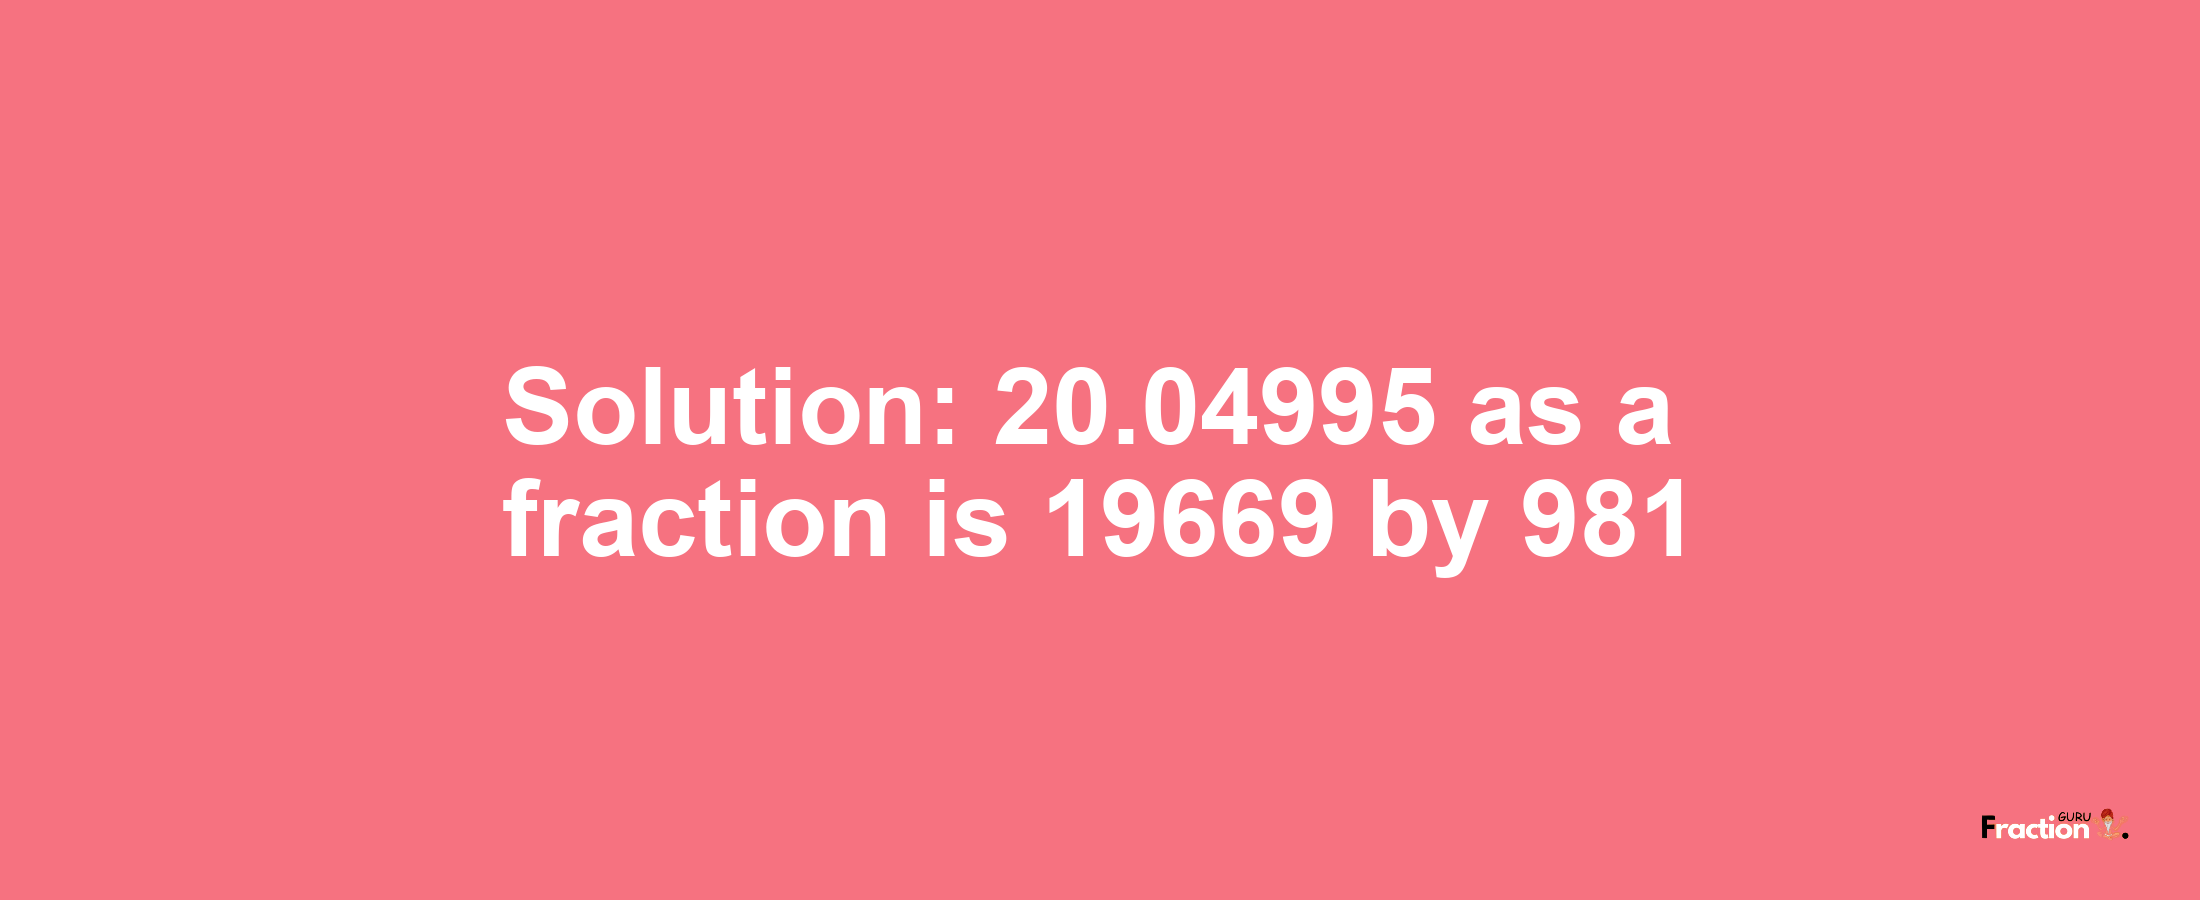 Solution:20.04995 as a fraction is 19669/981